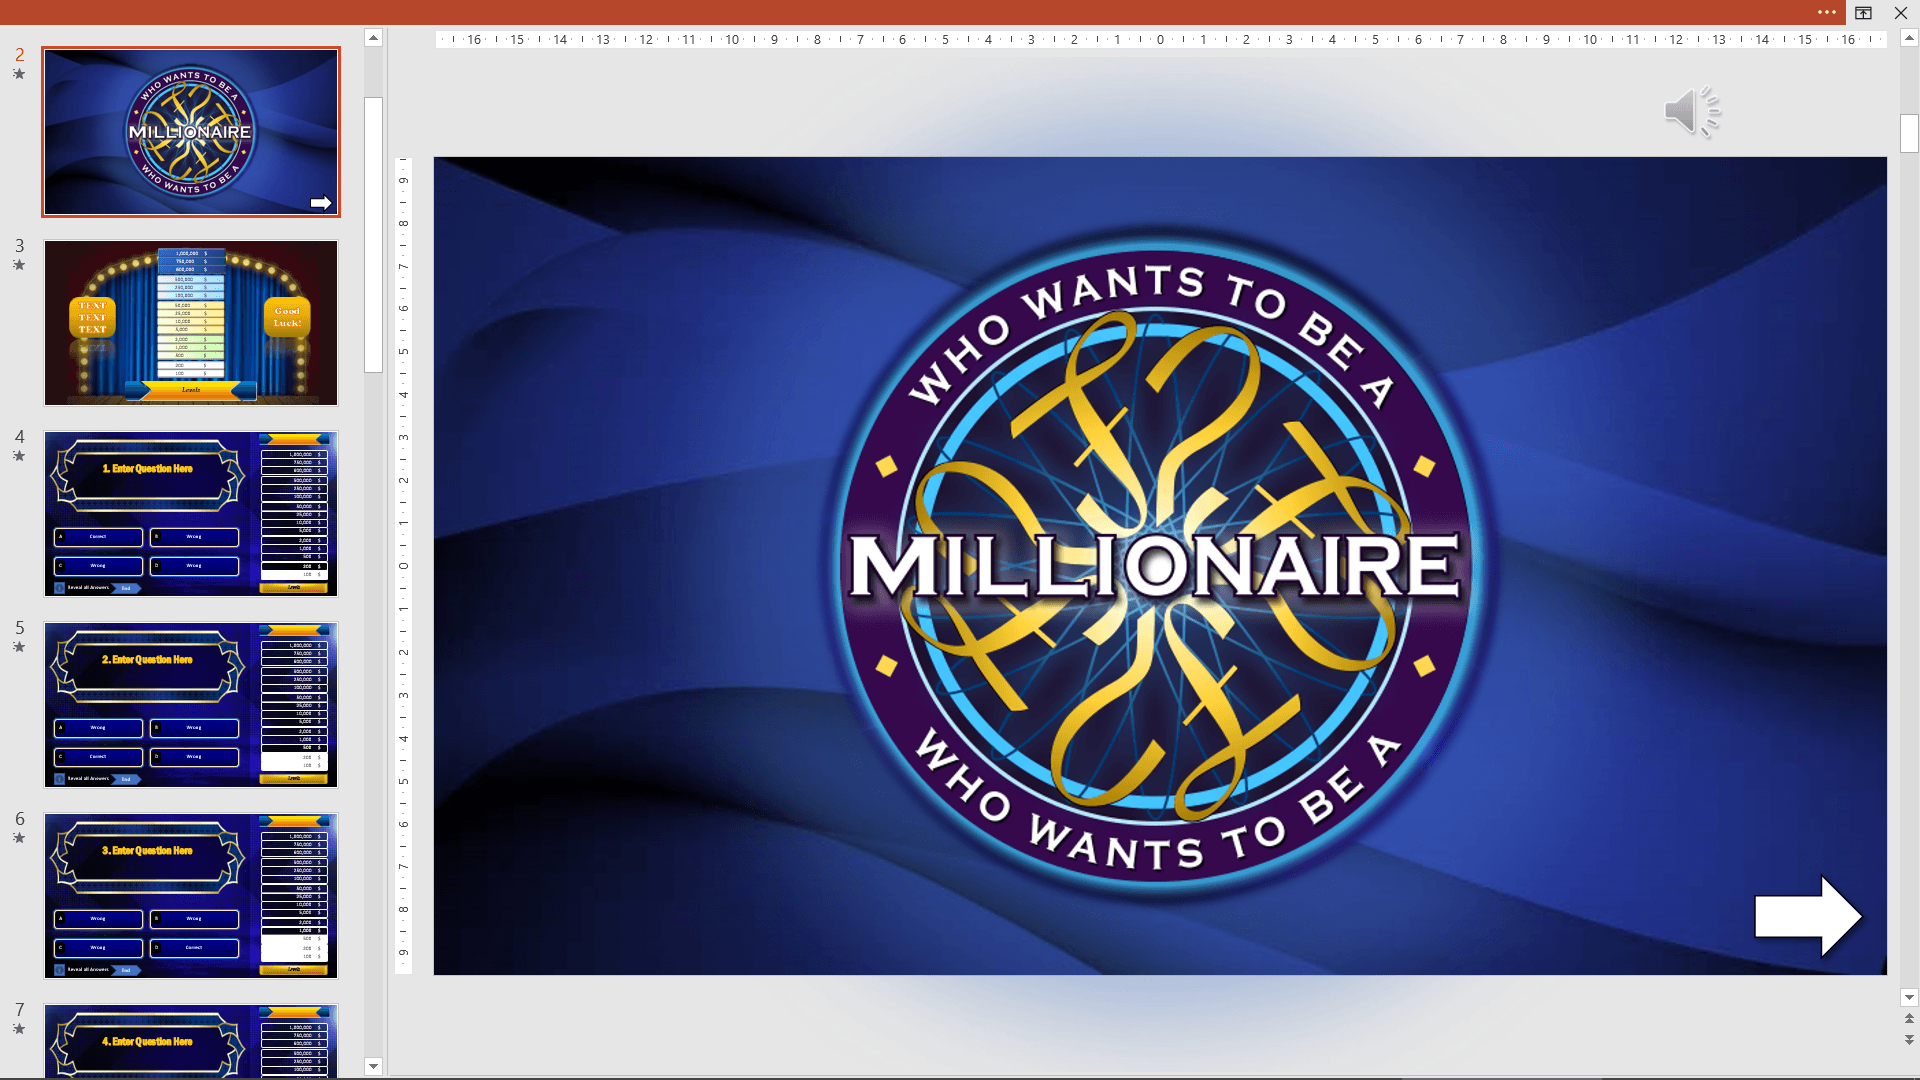 Who Wants To Be A Millionaire? – Powerpoint Vba Game Throughout Who Wants To Be A Millionaire Powerpoint Template